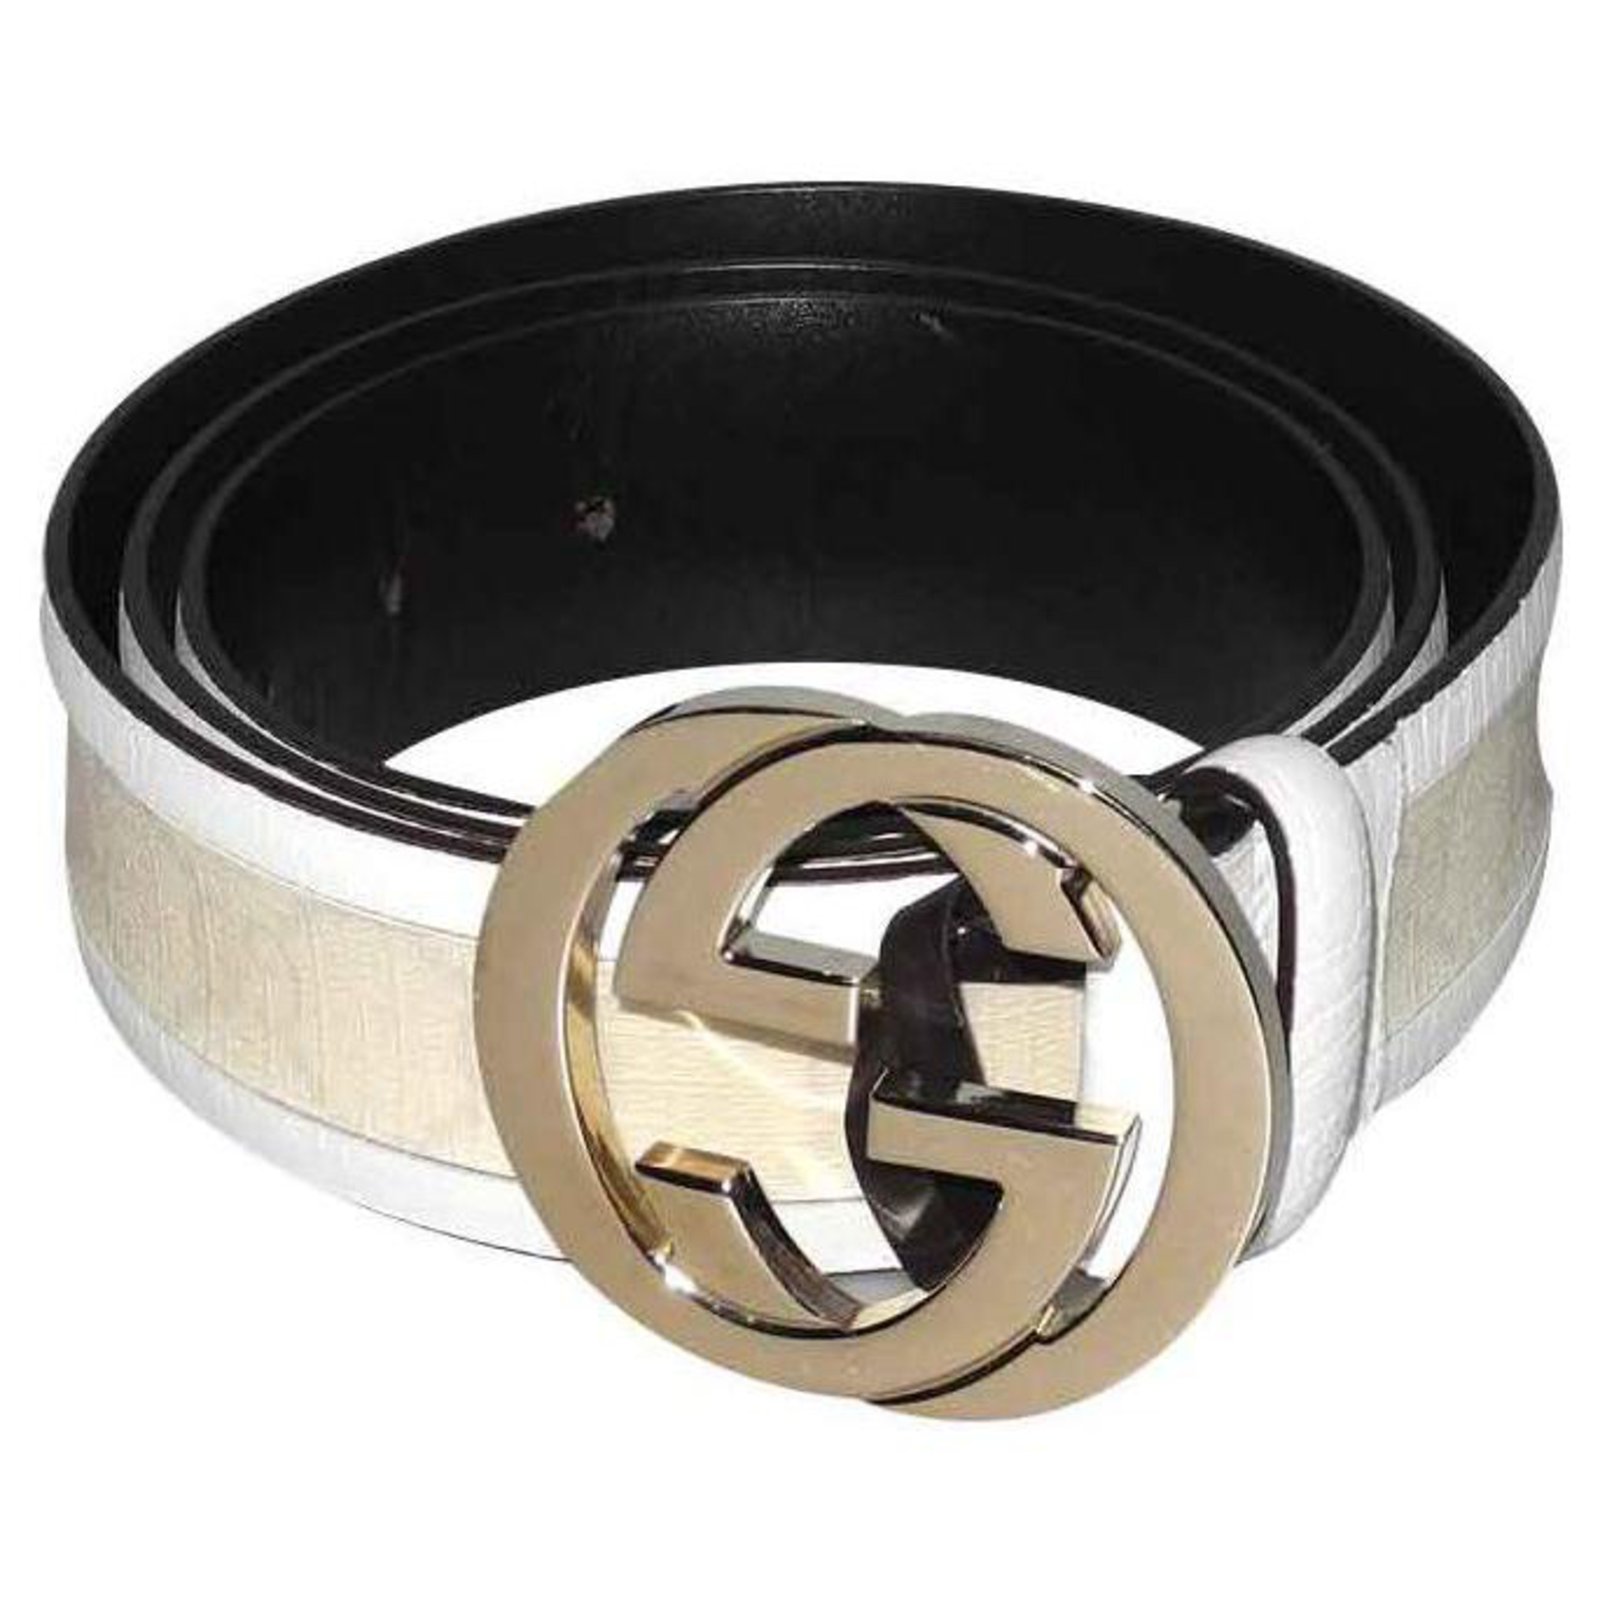 gucci white leather belt